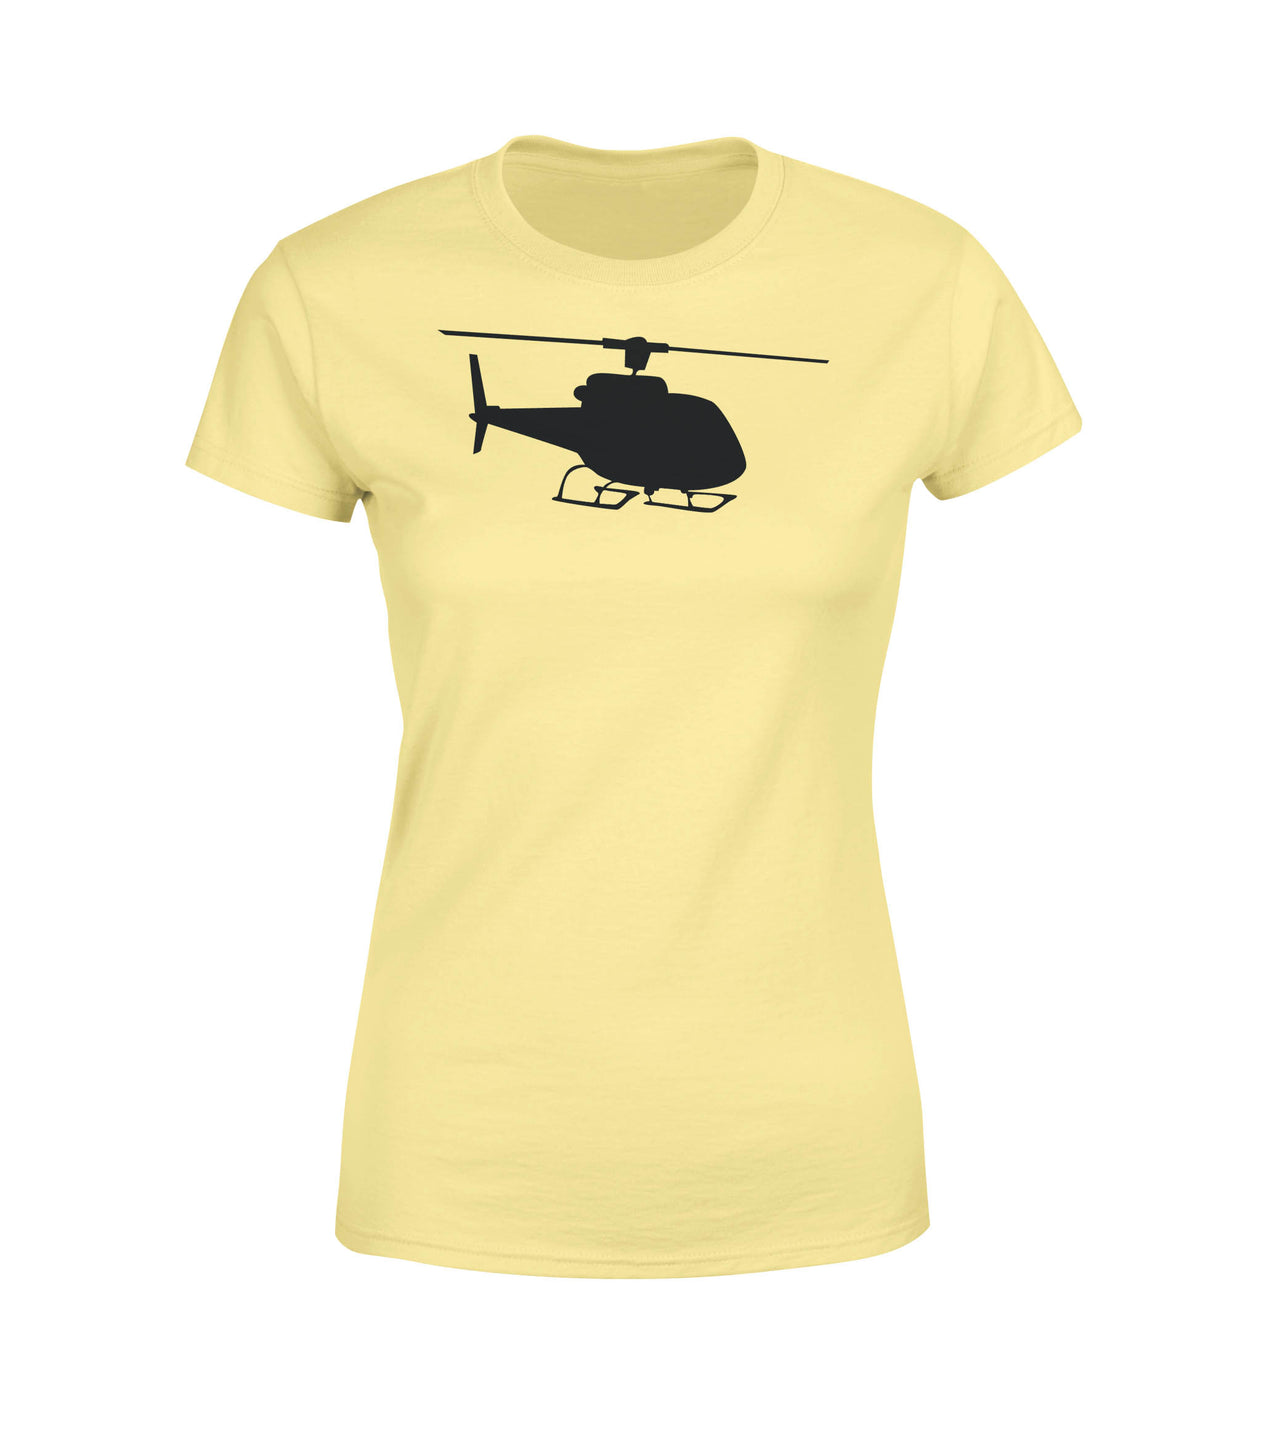 Helicopter Silhouette Designed Women T-Shirts